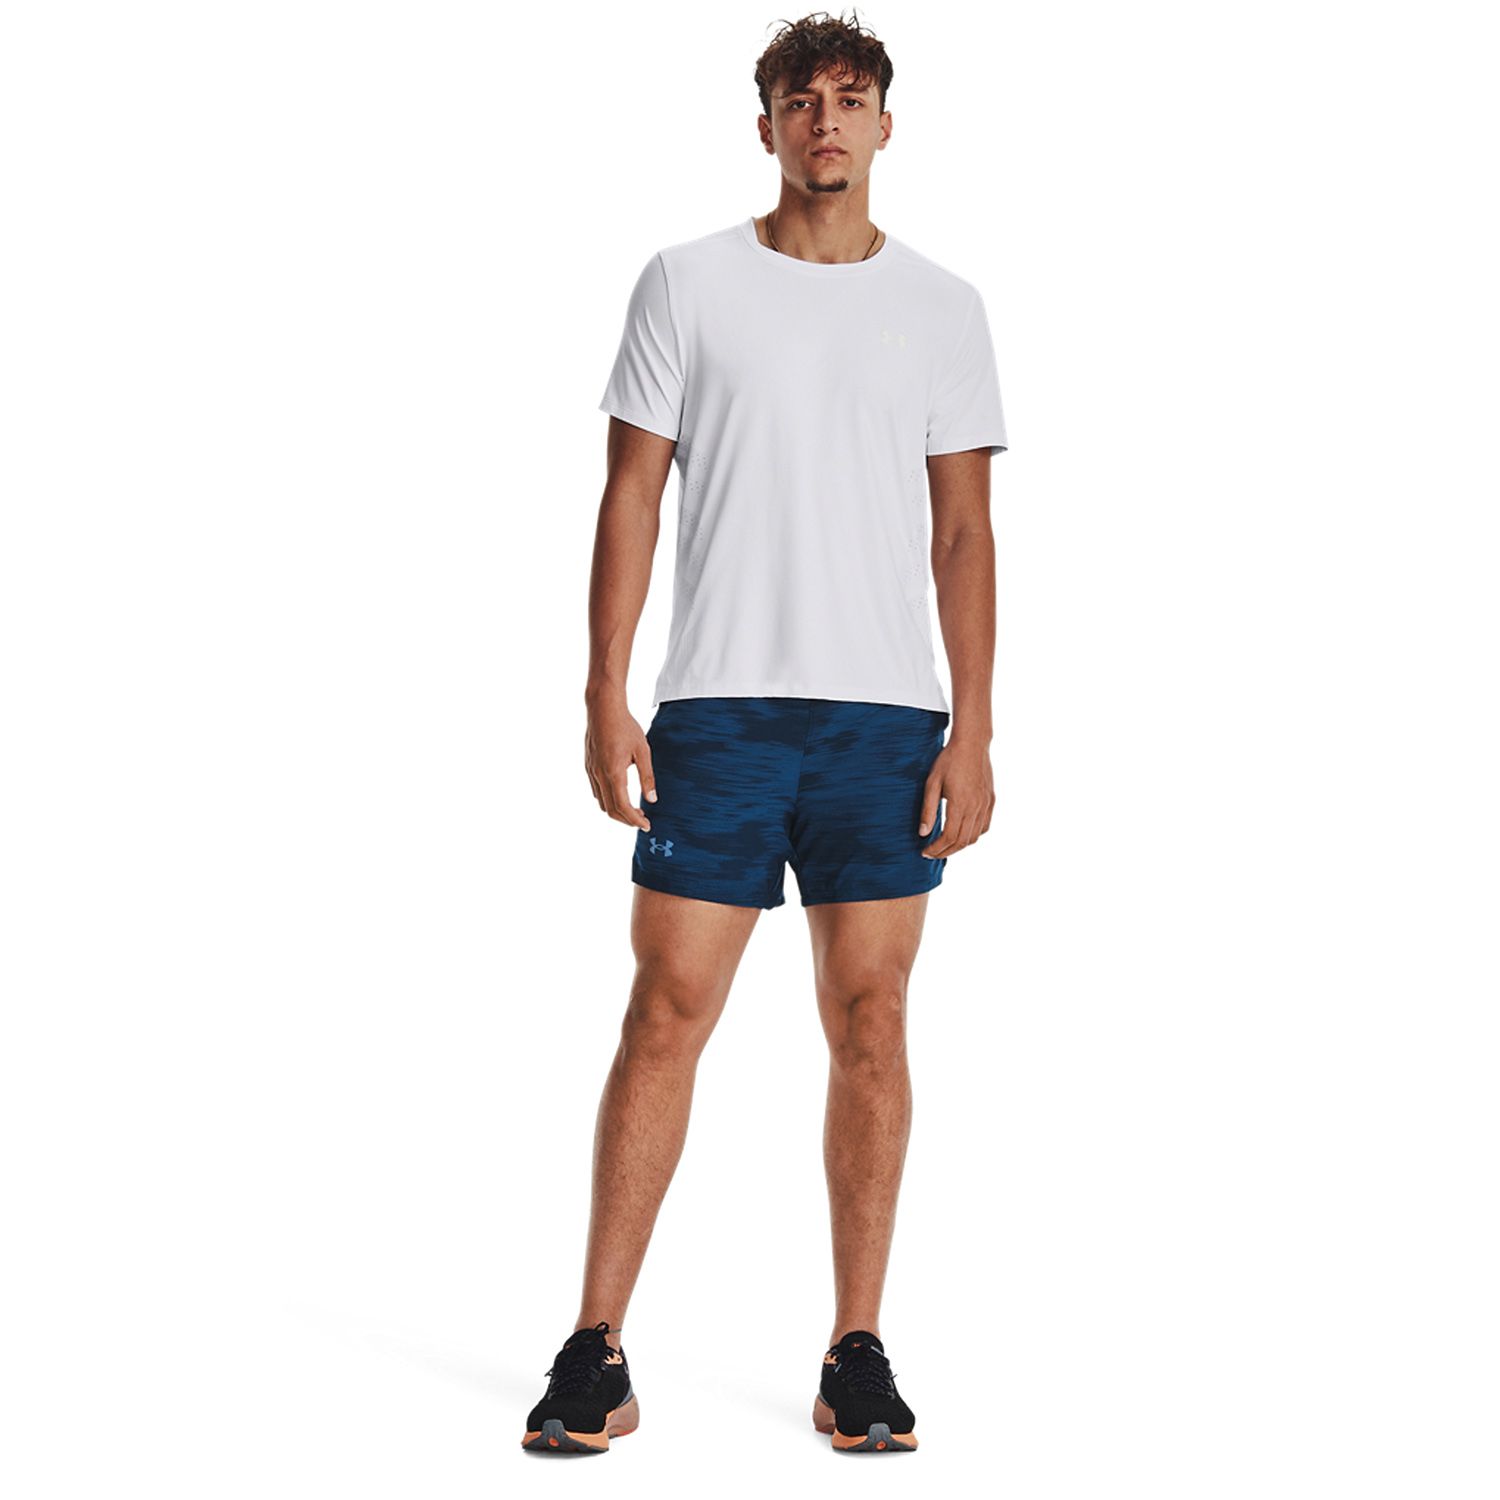 Under Armour Launch Printed 5in Shorts - Varsity Blue/Reflective